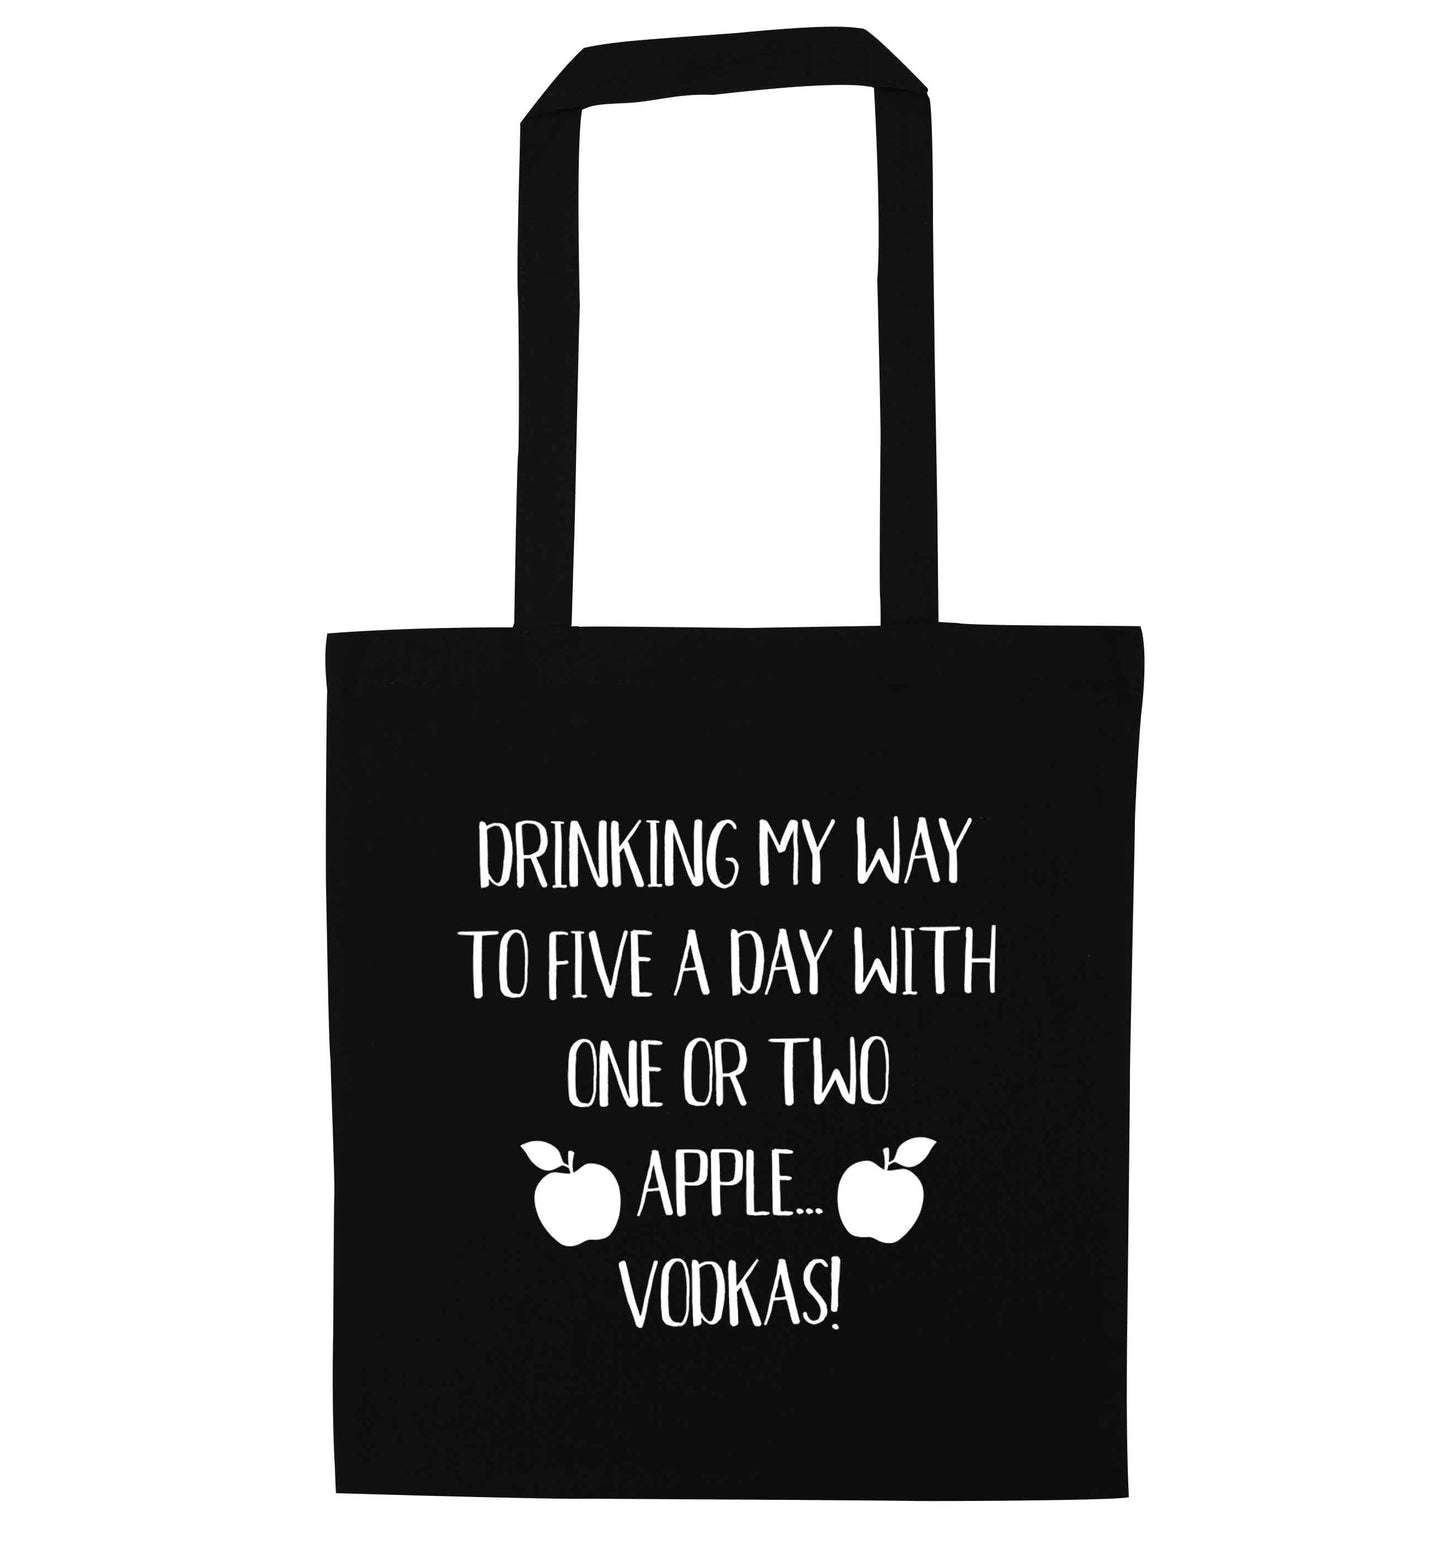 Drinking my way to five a day with one or two apple vodkas black tote bag